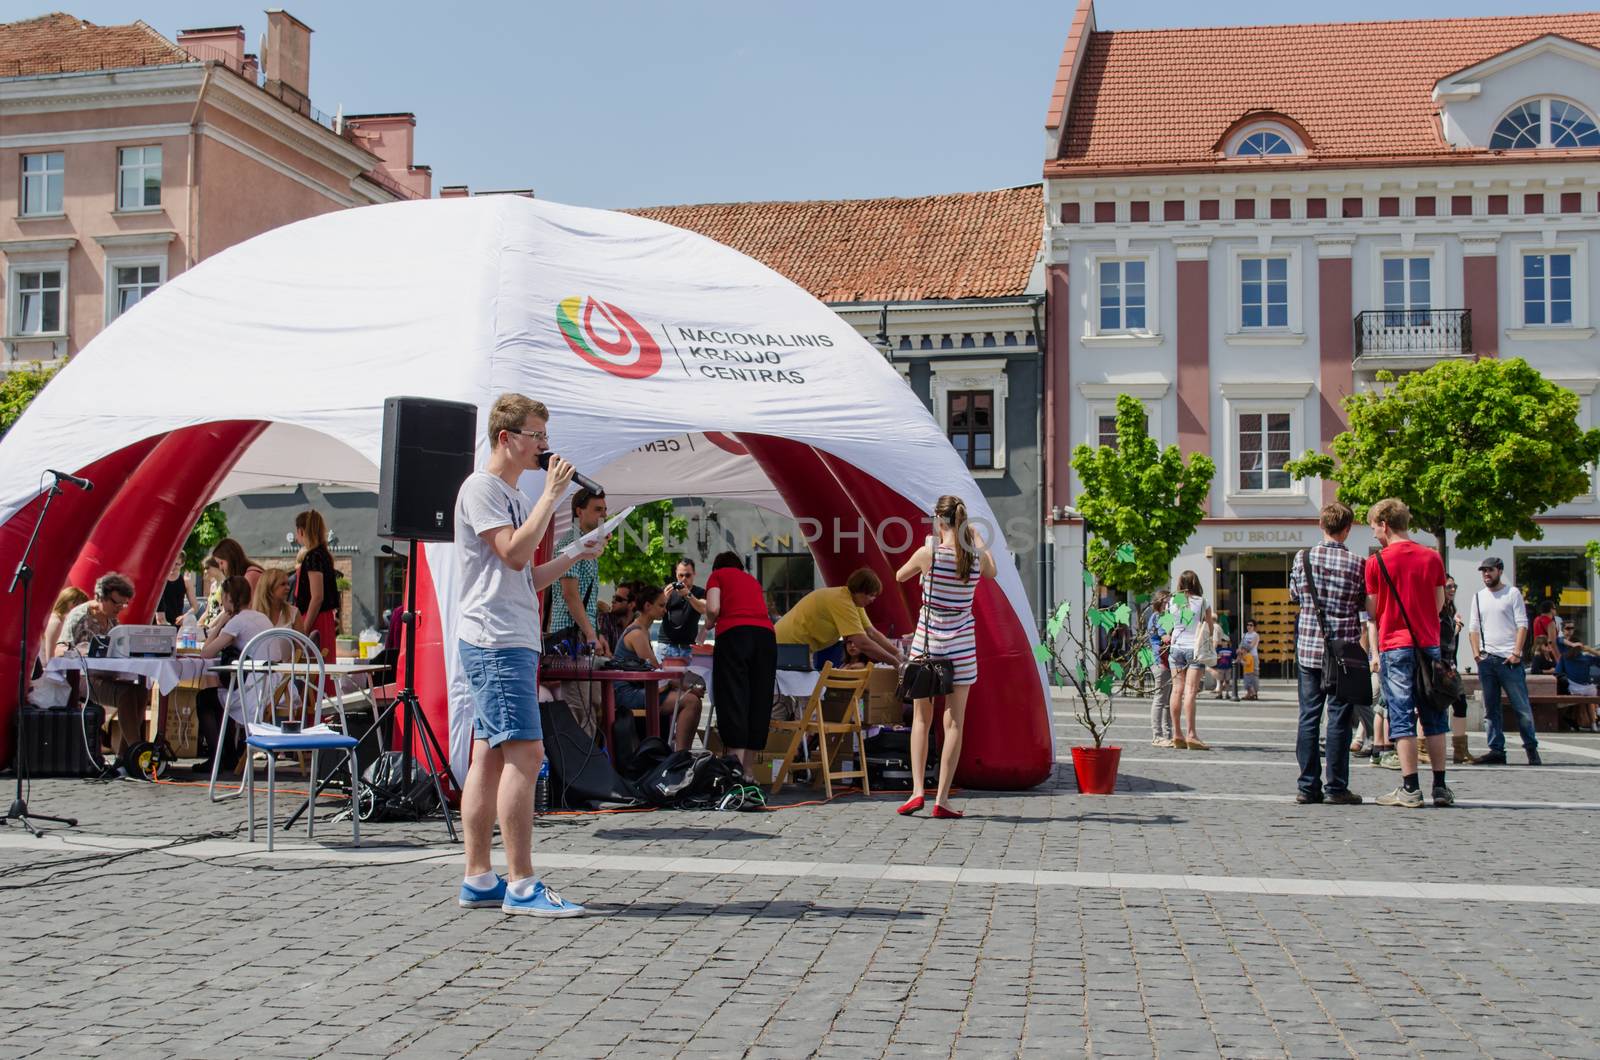 VILNIUS, LITHUANIA - MAY 18: man speaks through microphone on the street to the big event tent on May 18, 2013 in Vilnius.